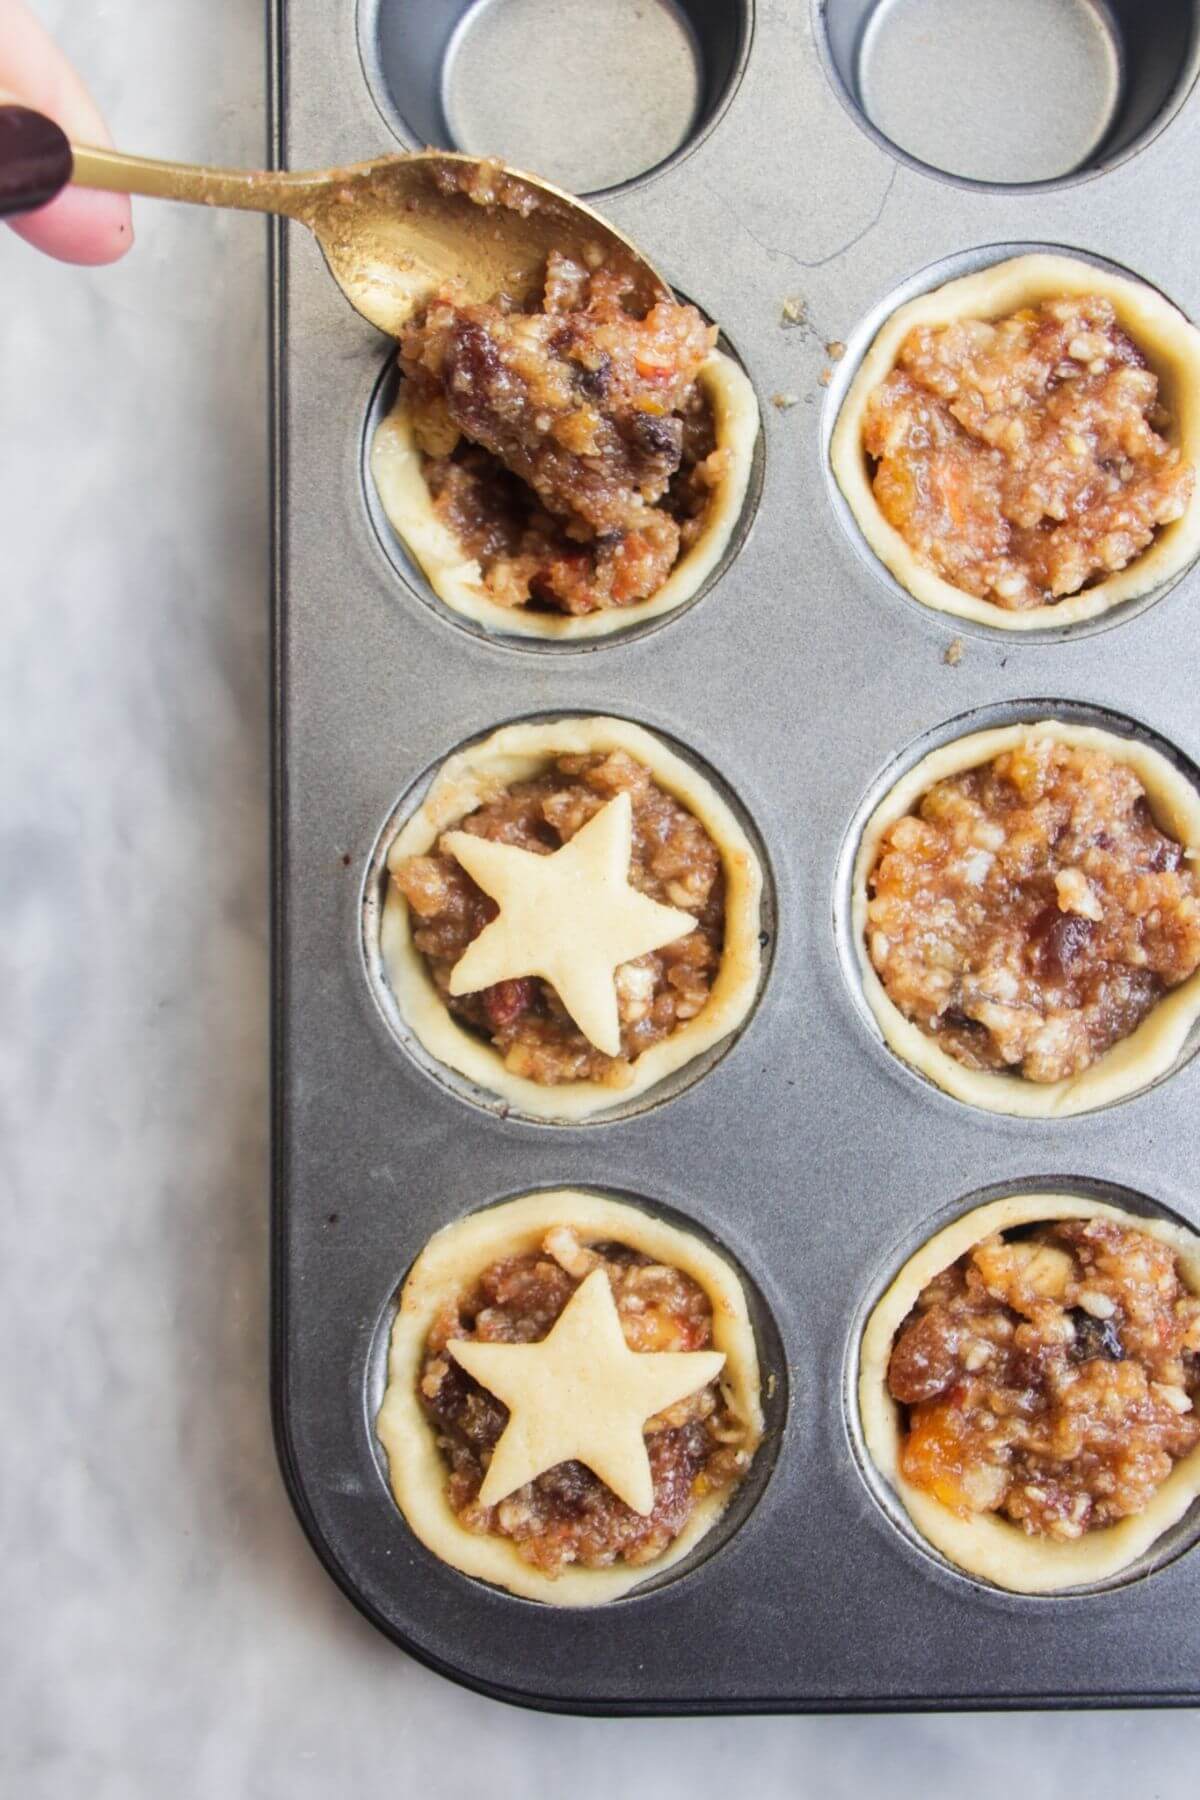 A spoon filling pastry case with fruit mince in a small muffin tin.